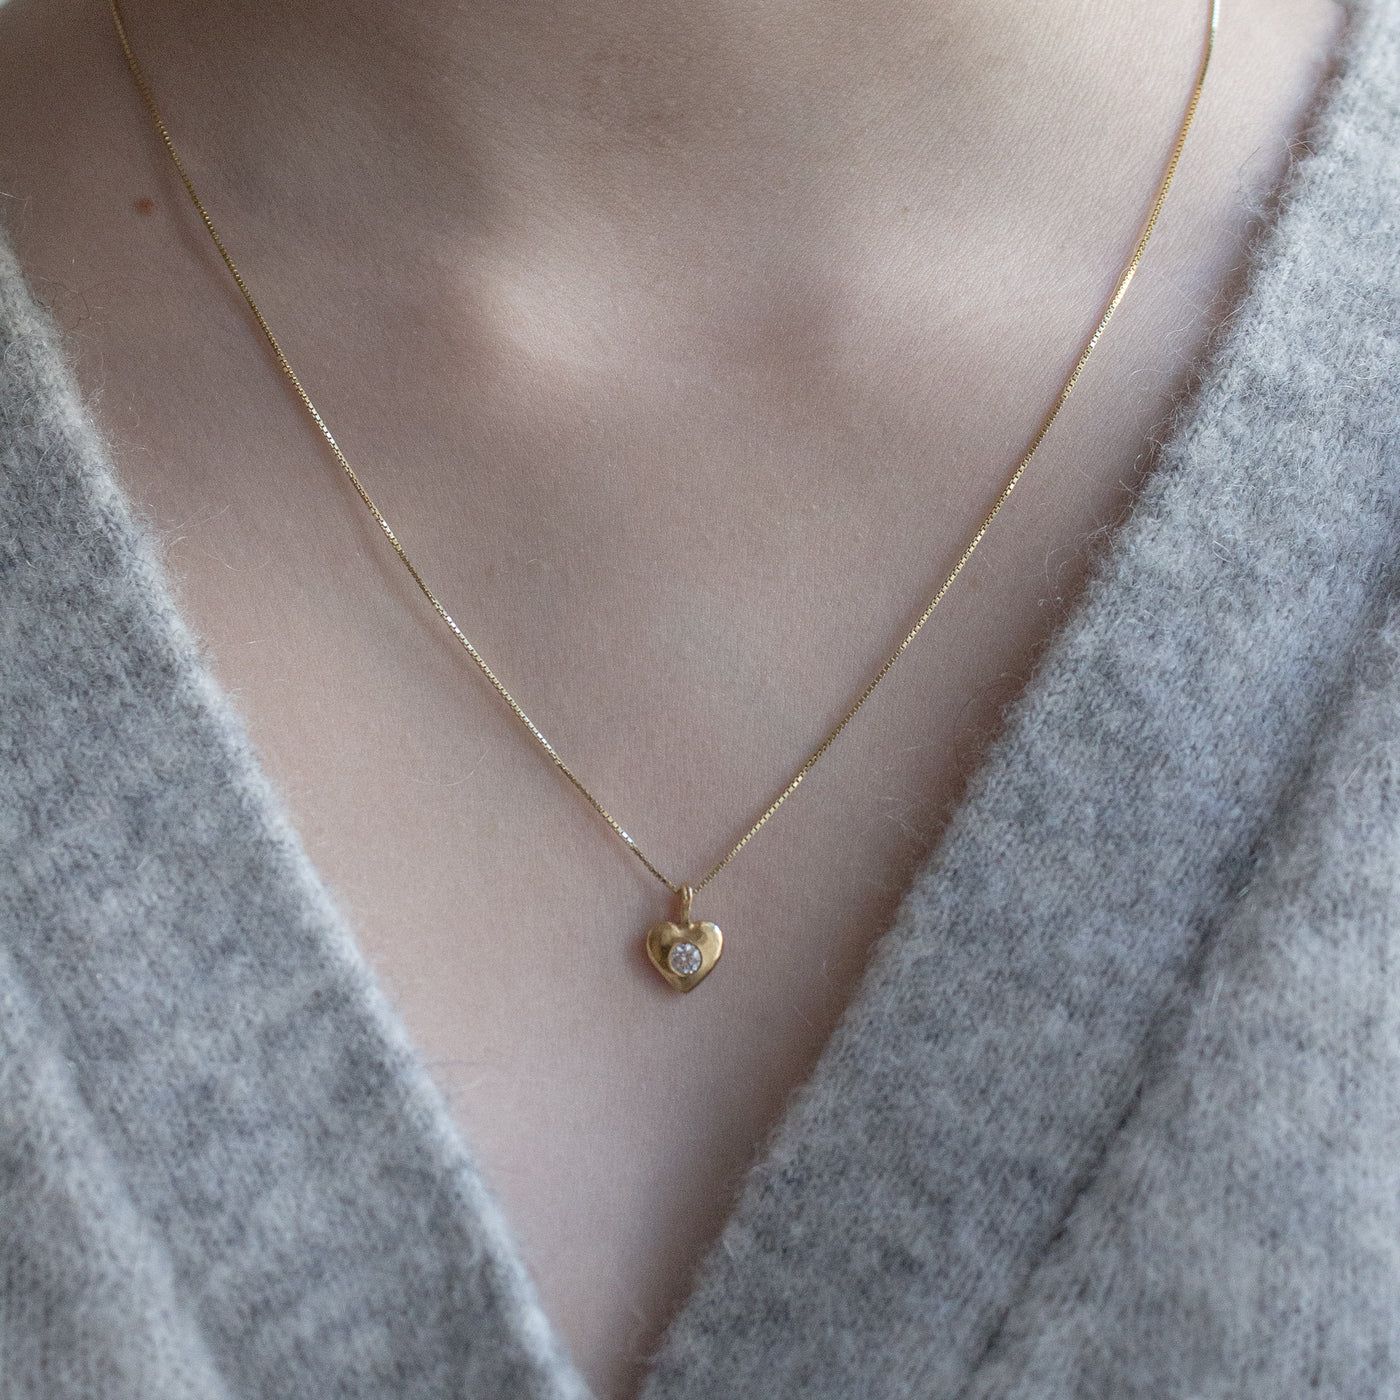 HJERTE // Necklace with heart pendant gold-plated with zirconia